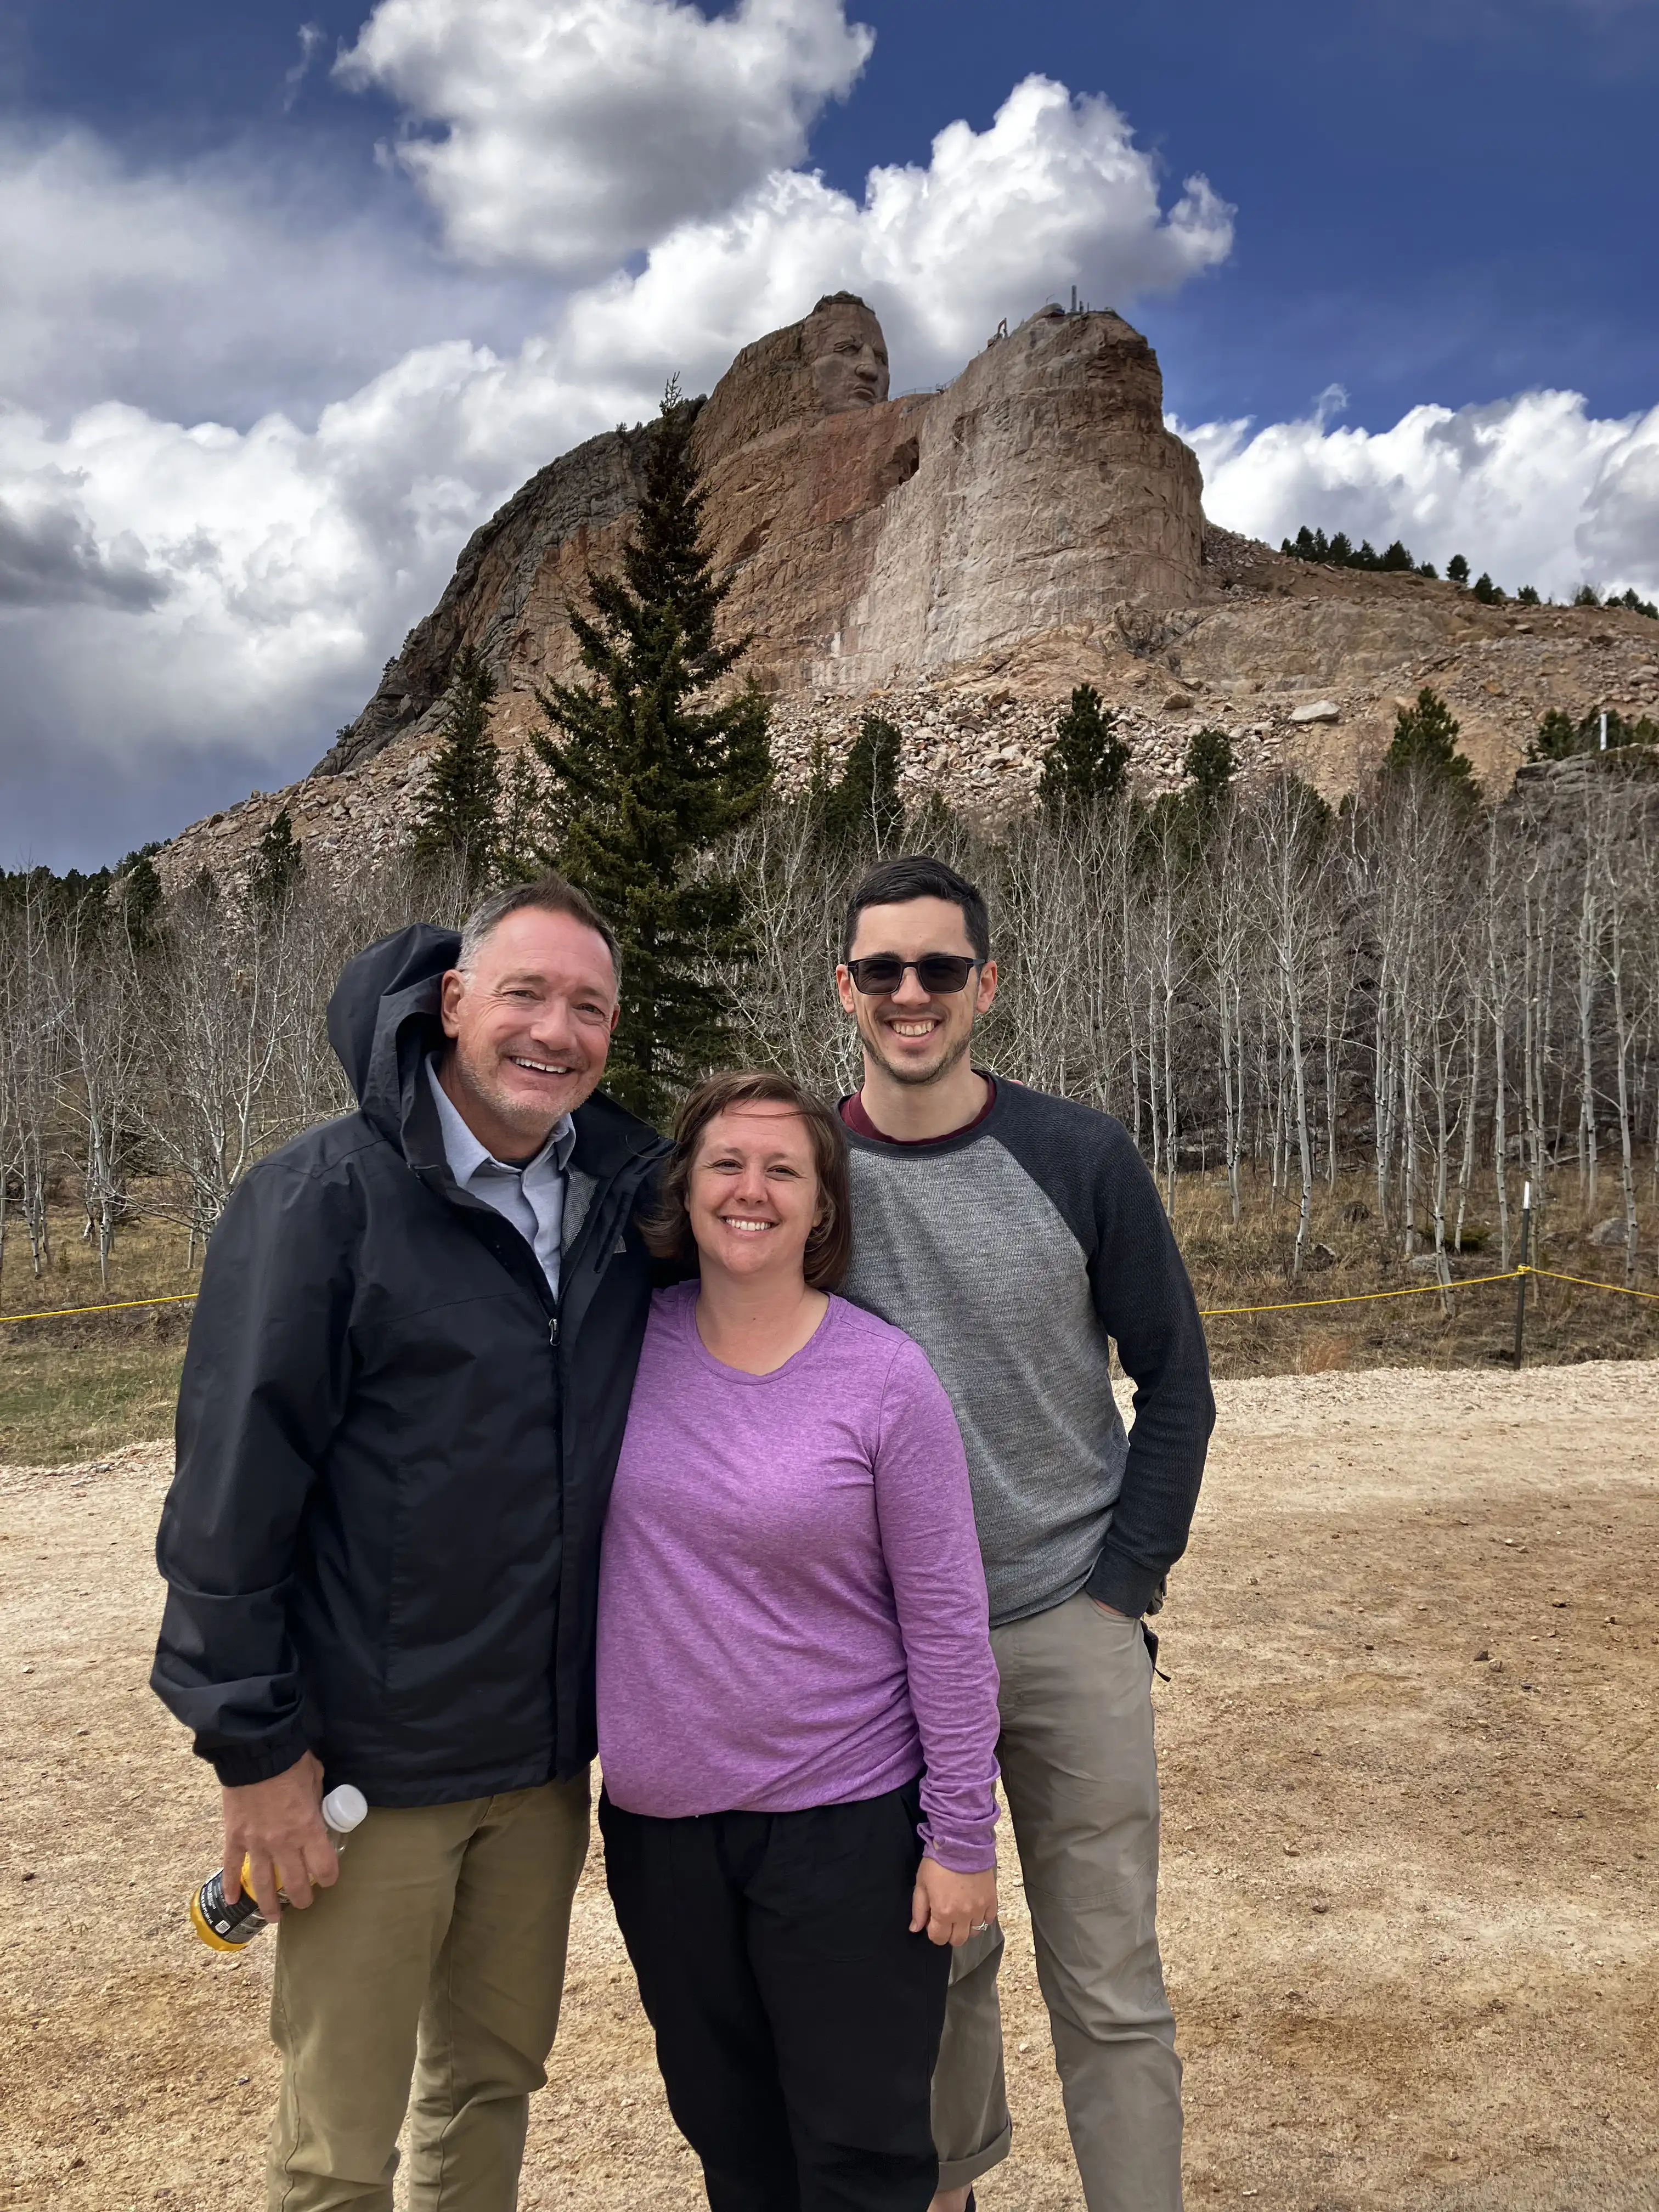 Jim Walker, Alex and Amie before the Crazy Horse Memorial.